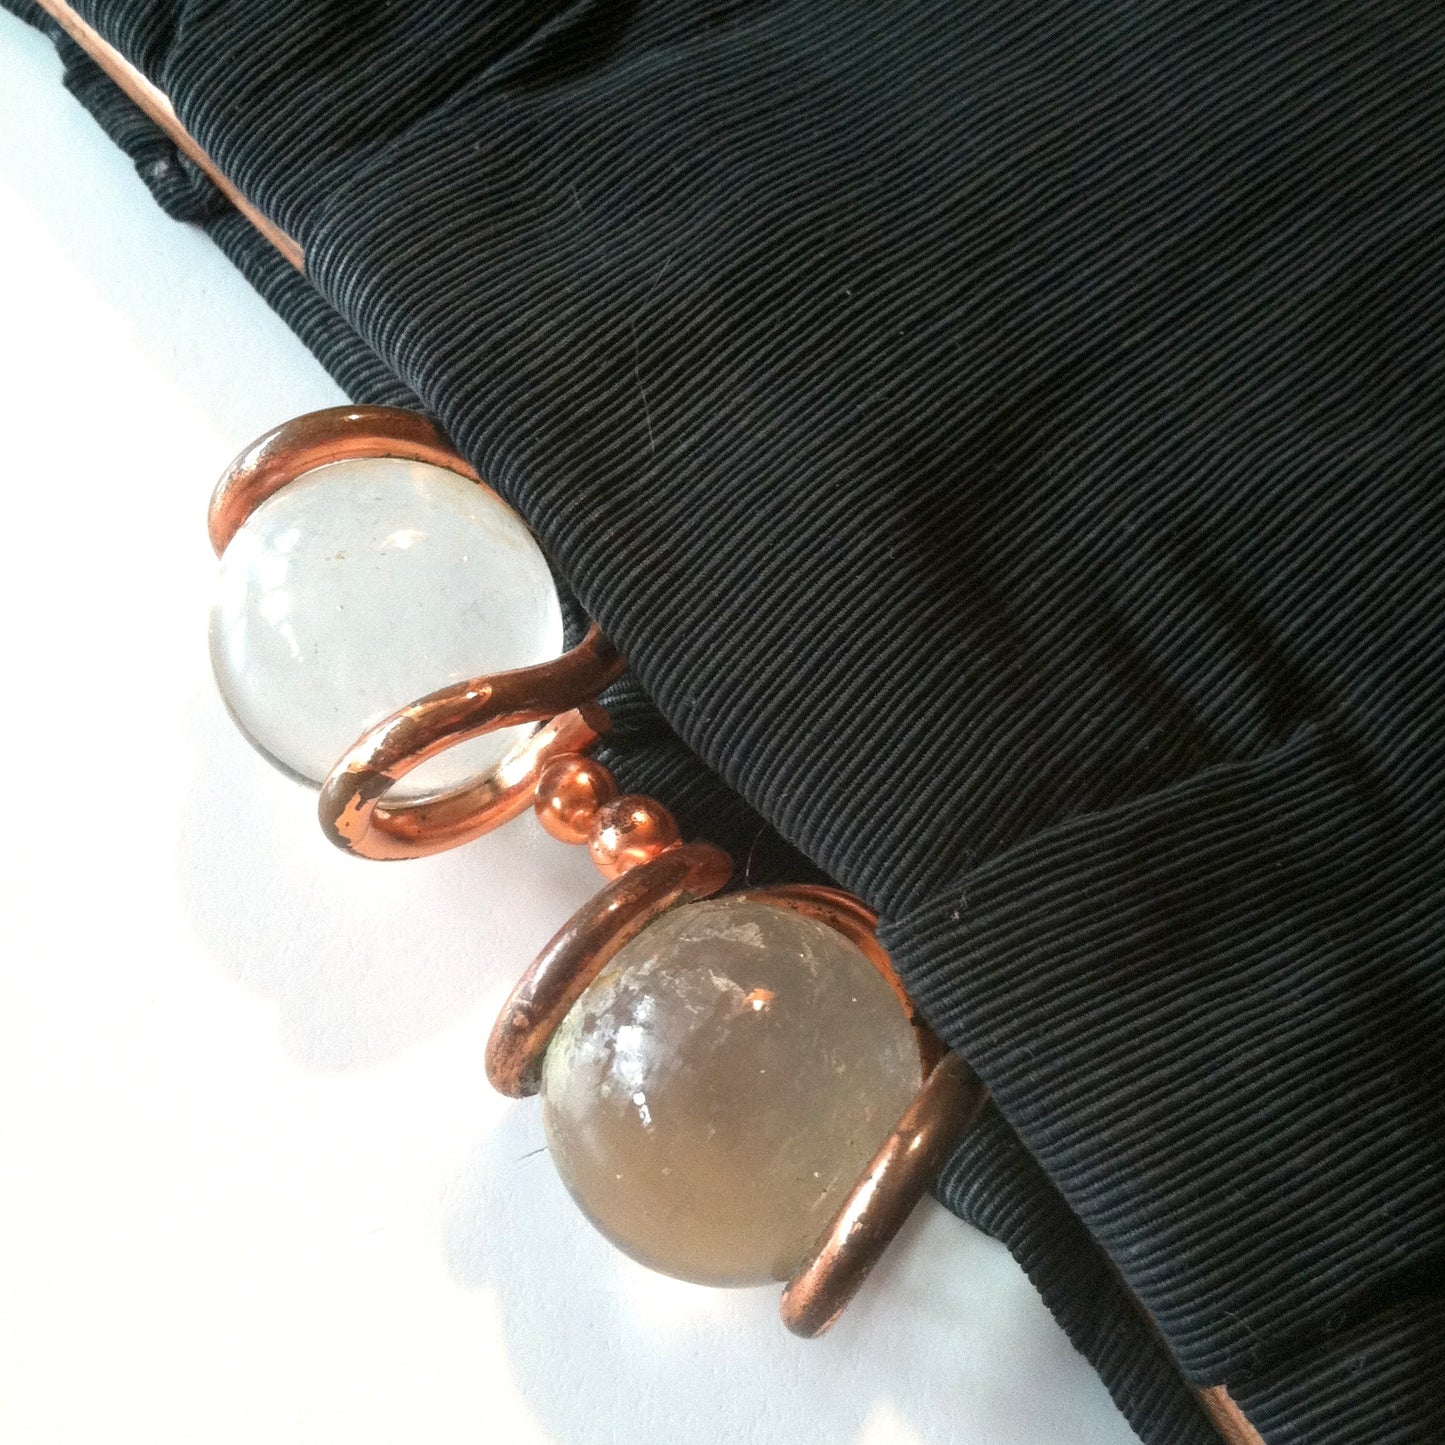 Copper and Lucite Framed Clutch Style Handbag circa 1940s